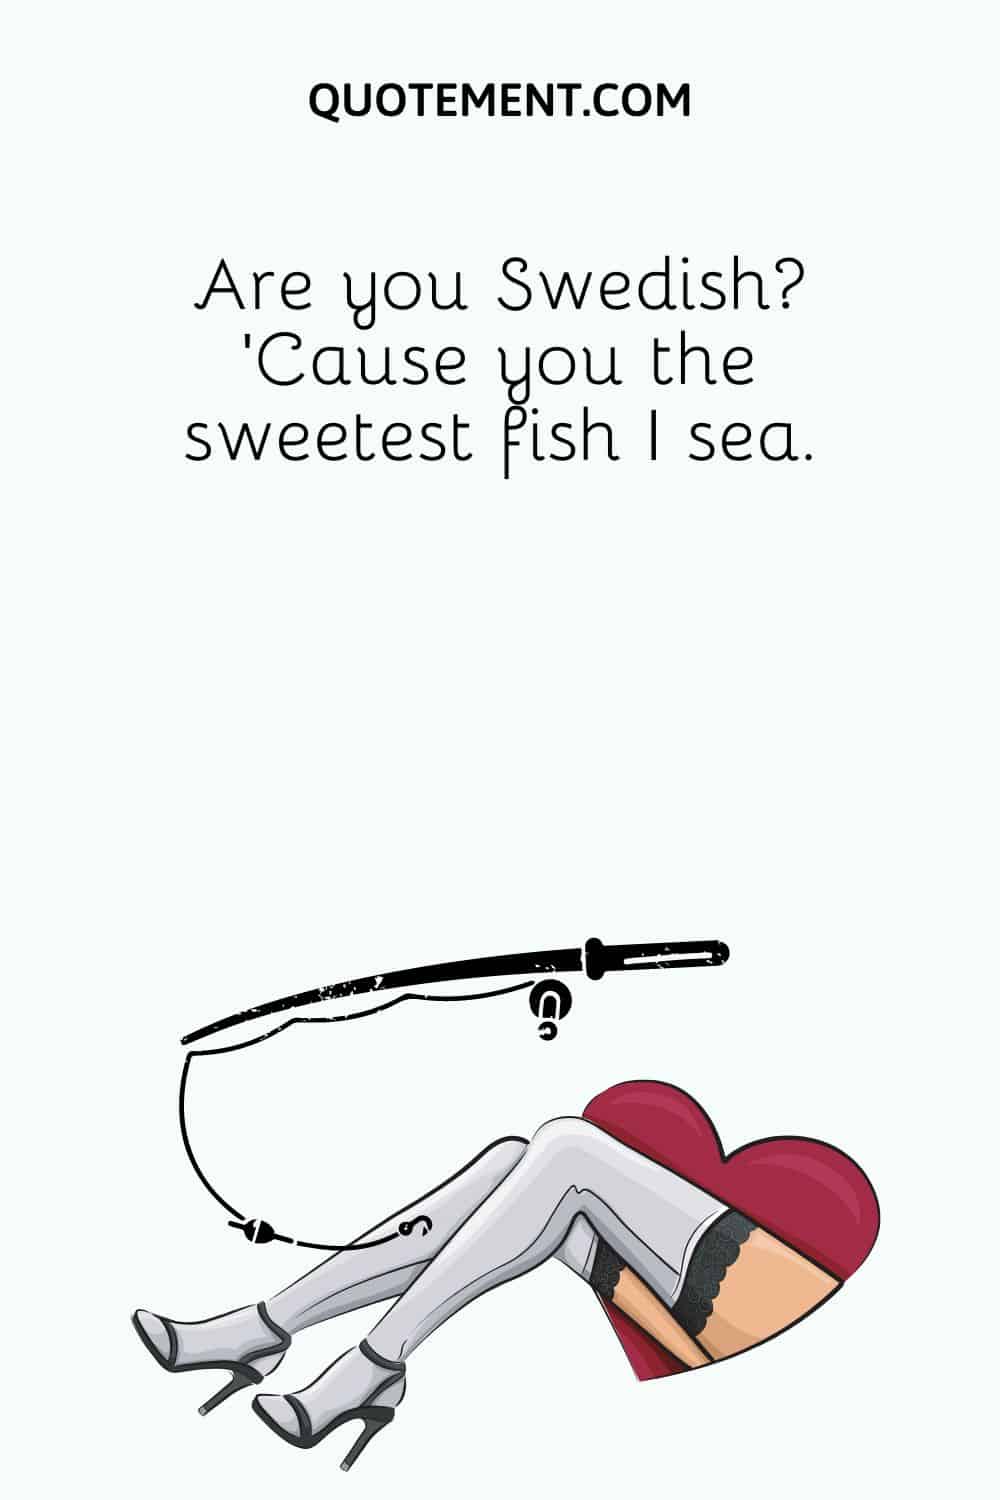 Are you Swedish 'Cause you the sweetest fish I sea